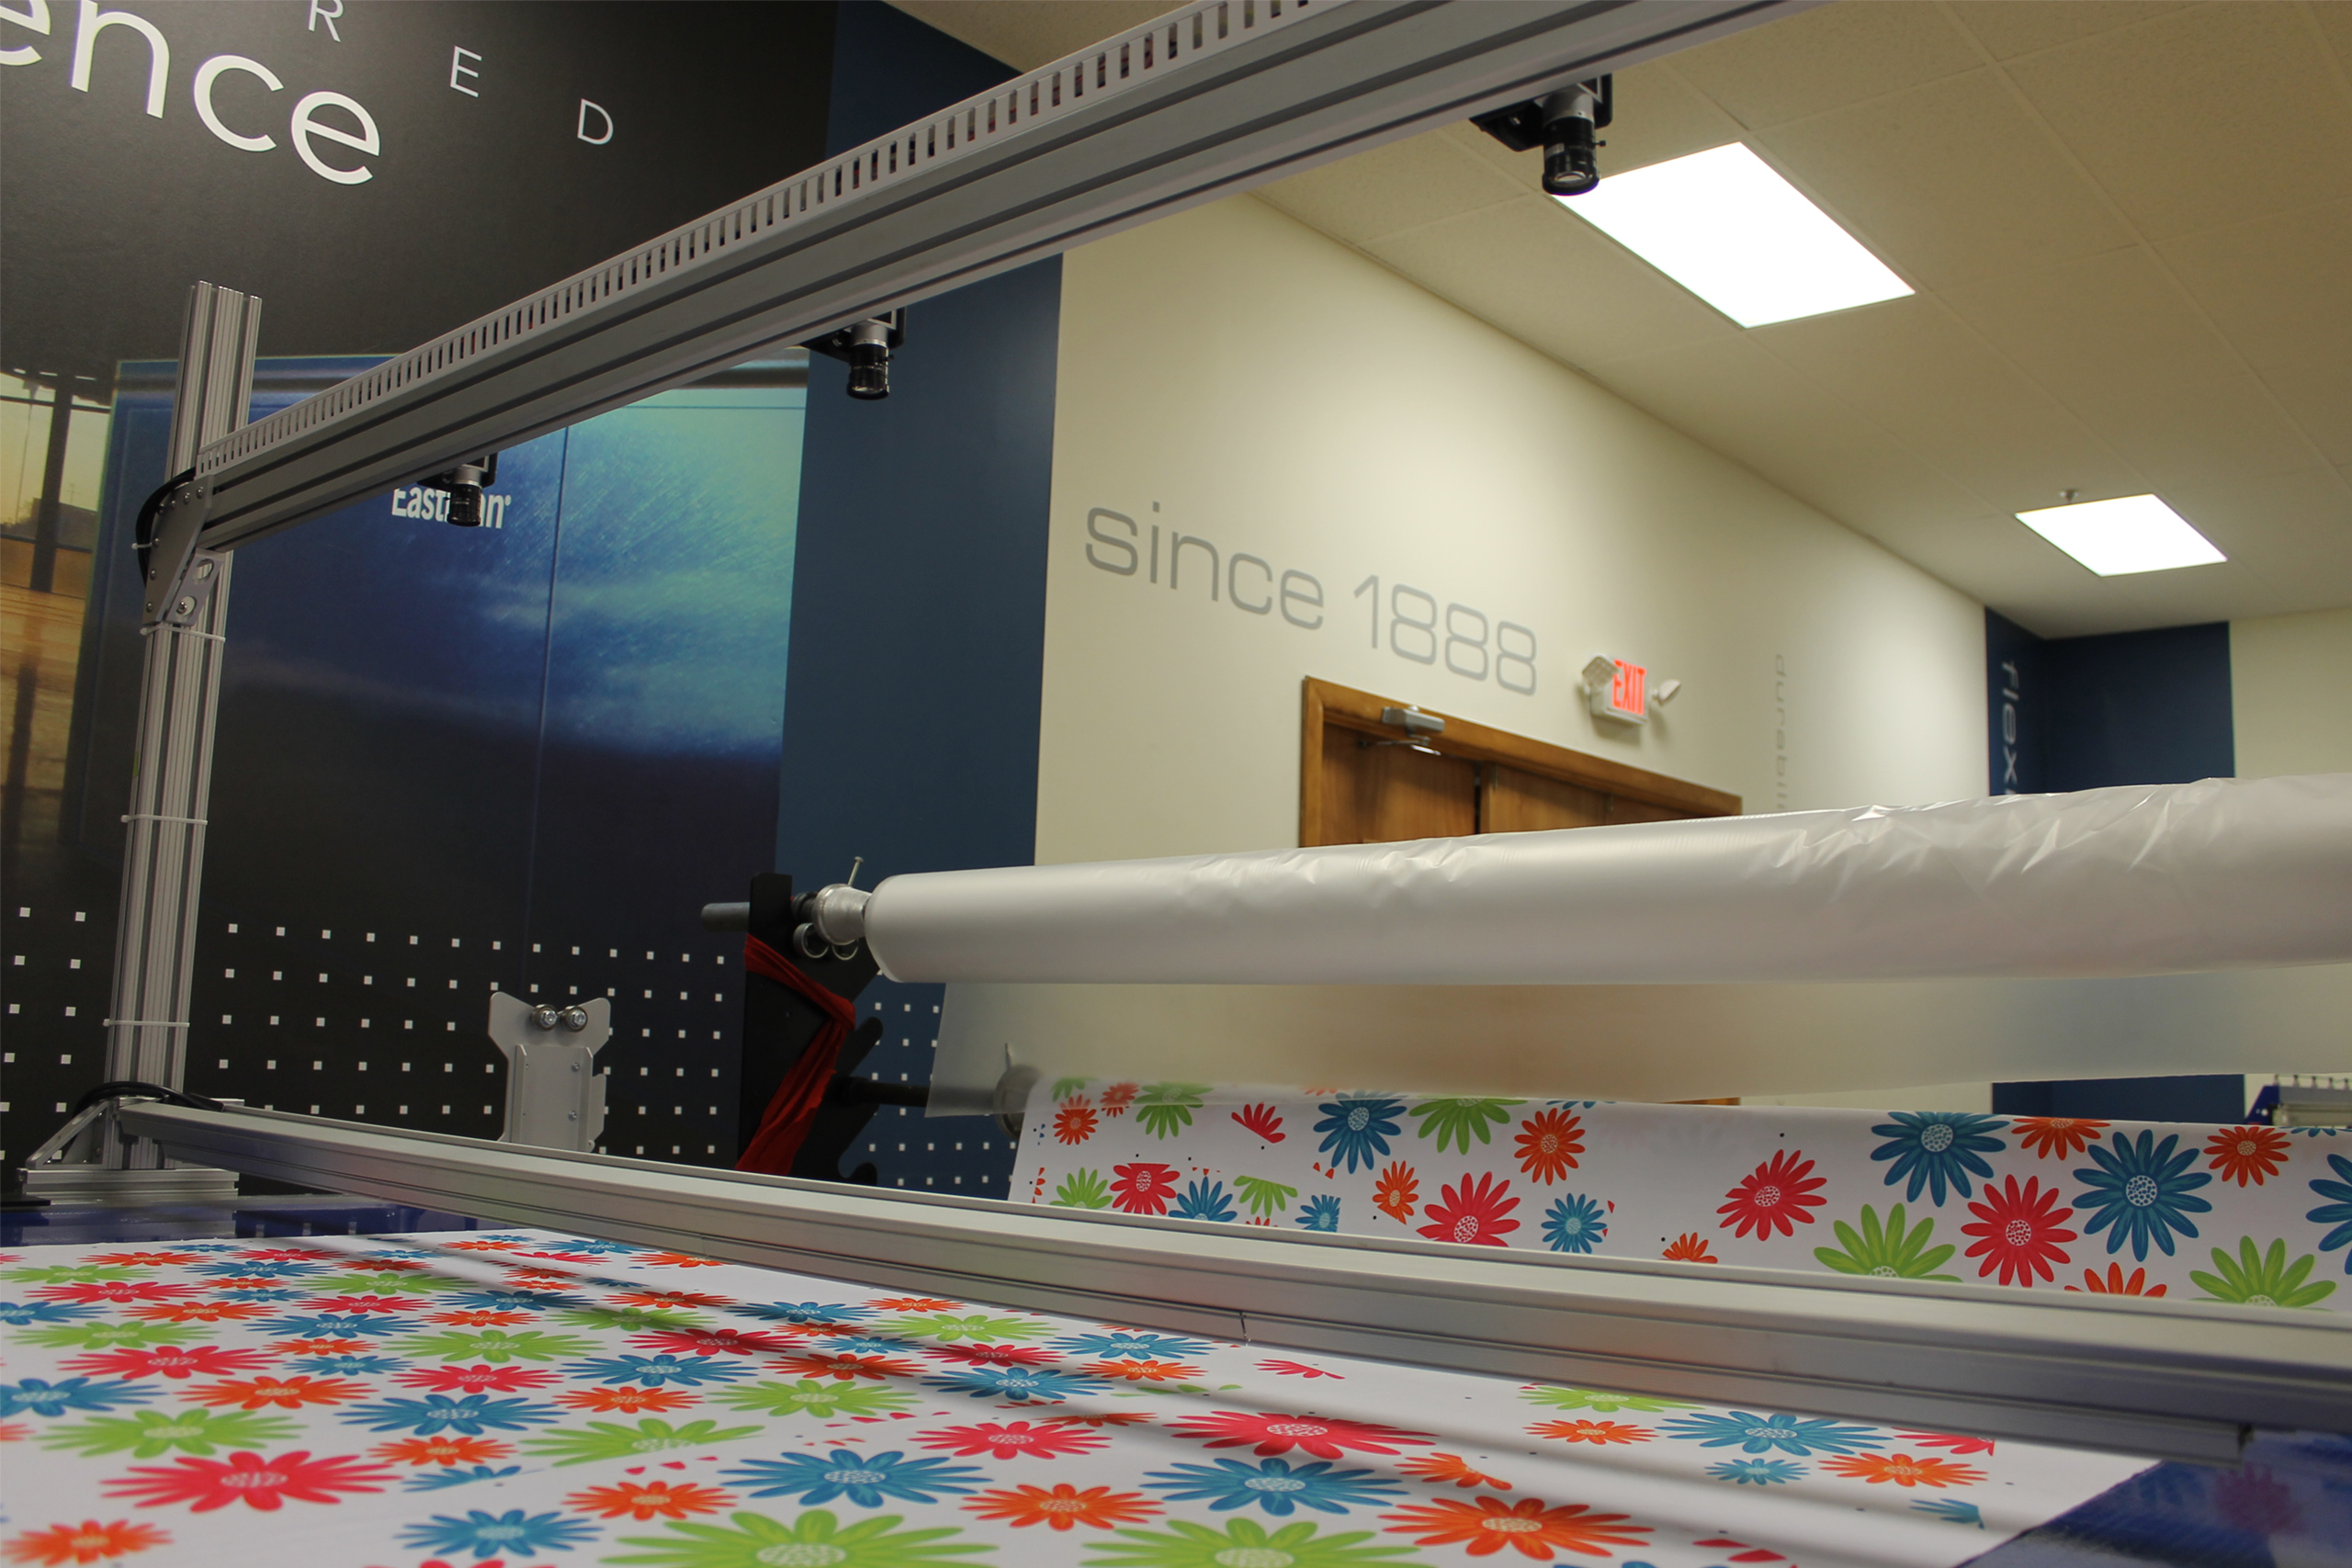 New collaboration announced for digitally printed graphics